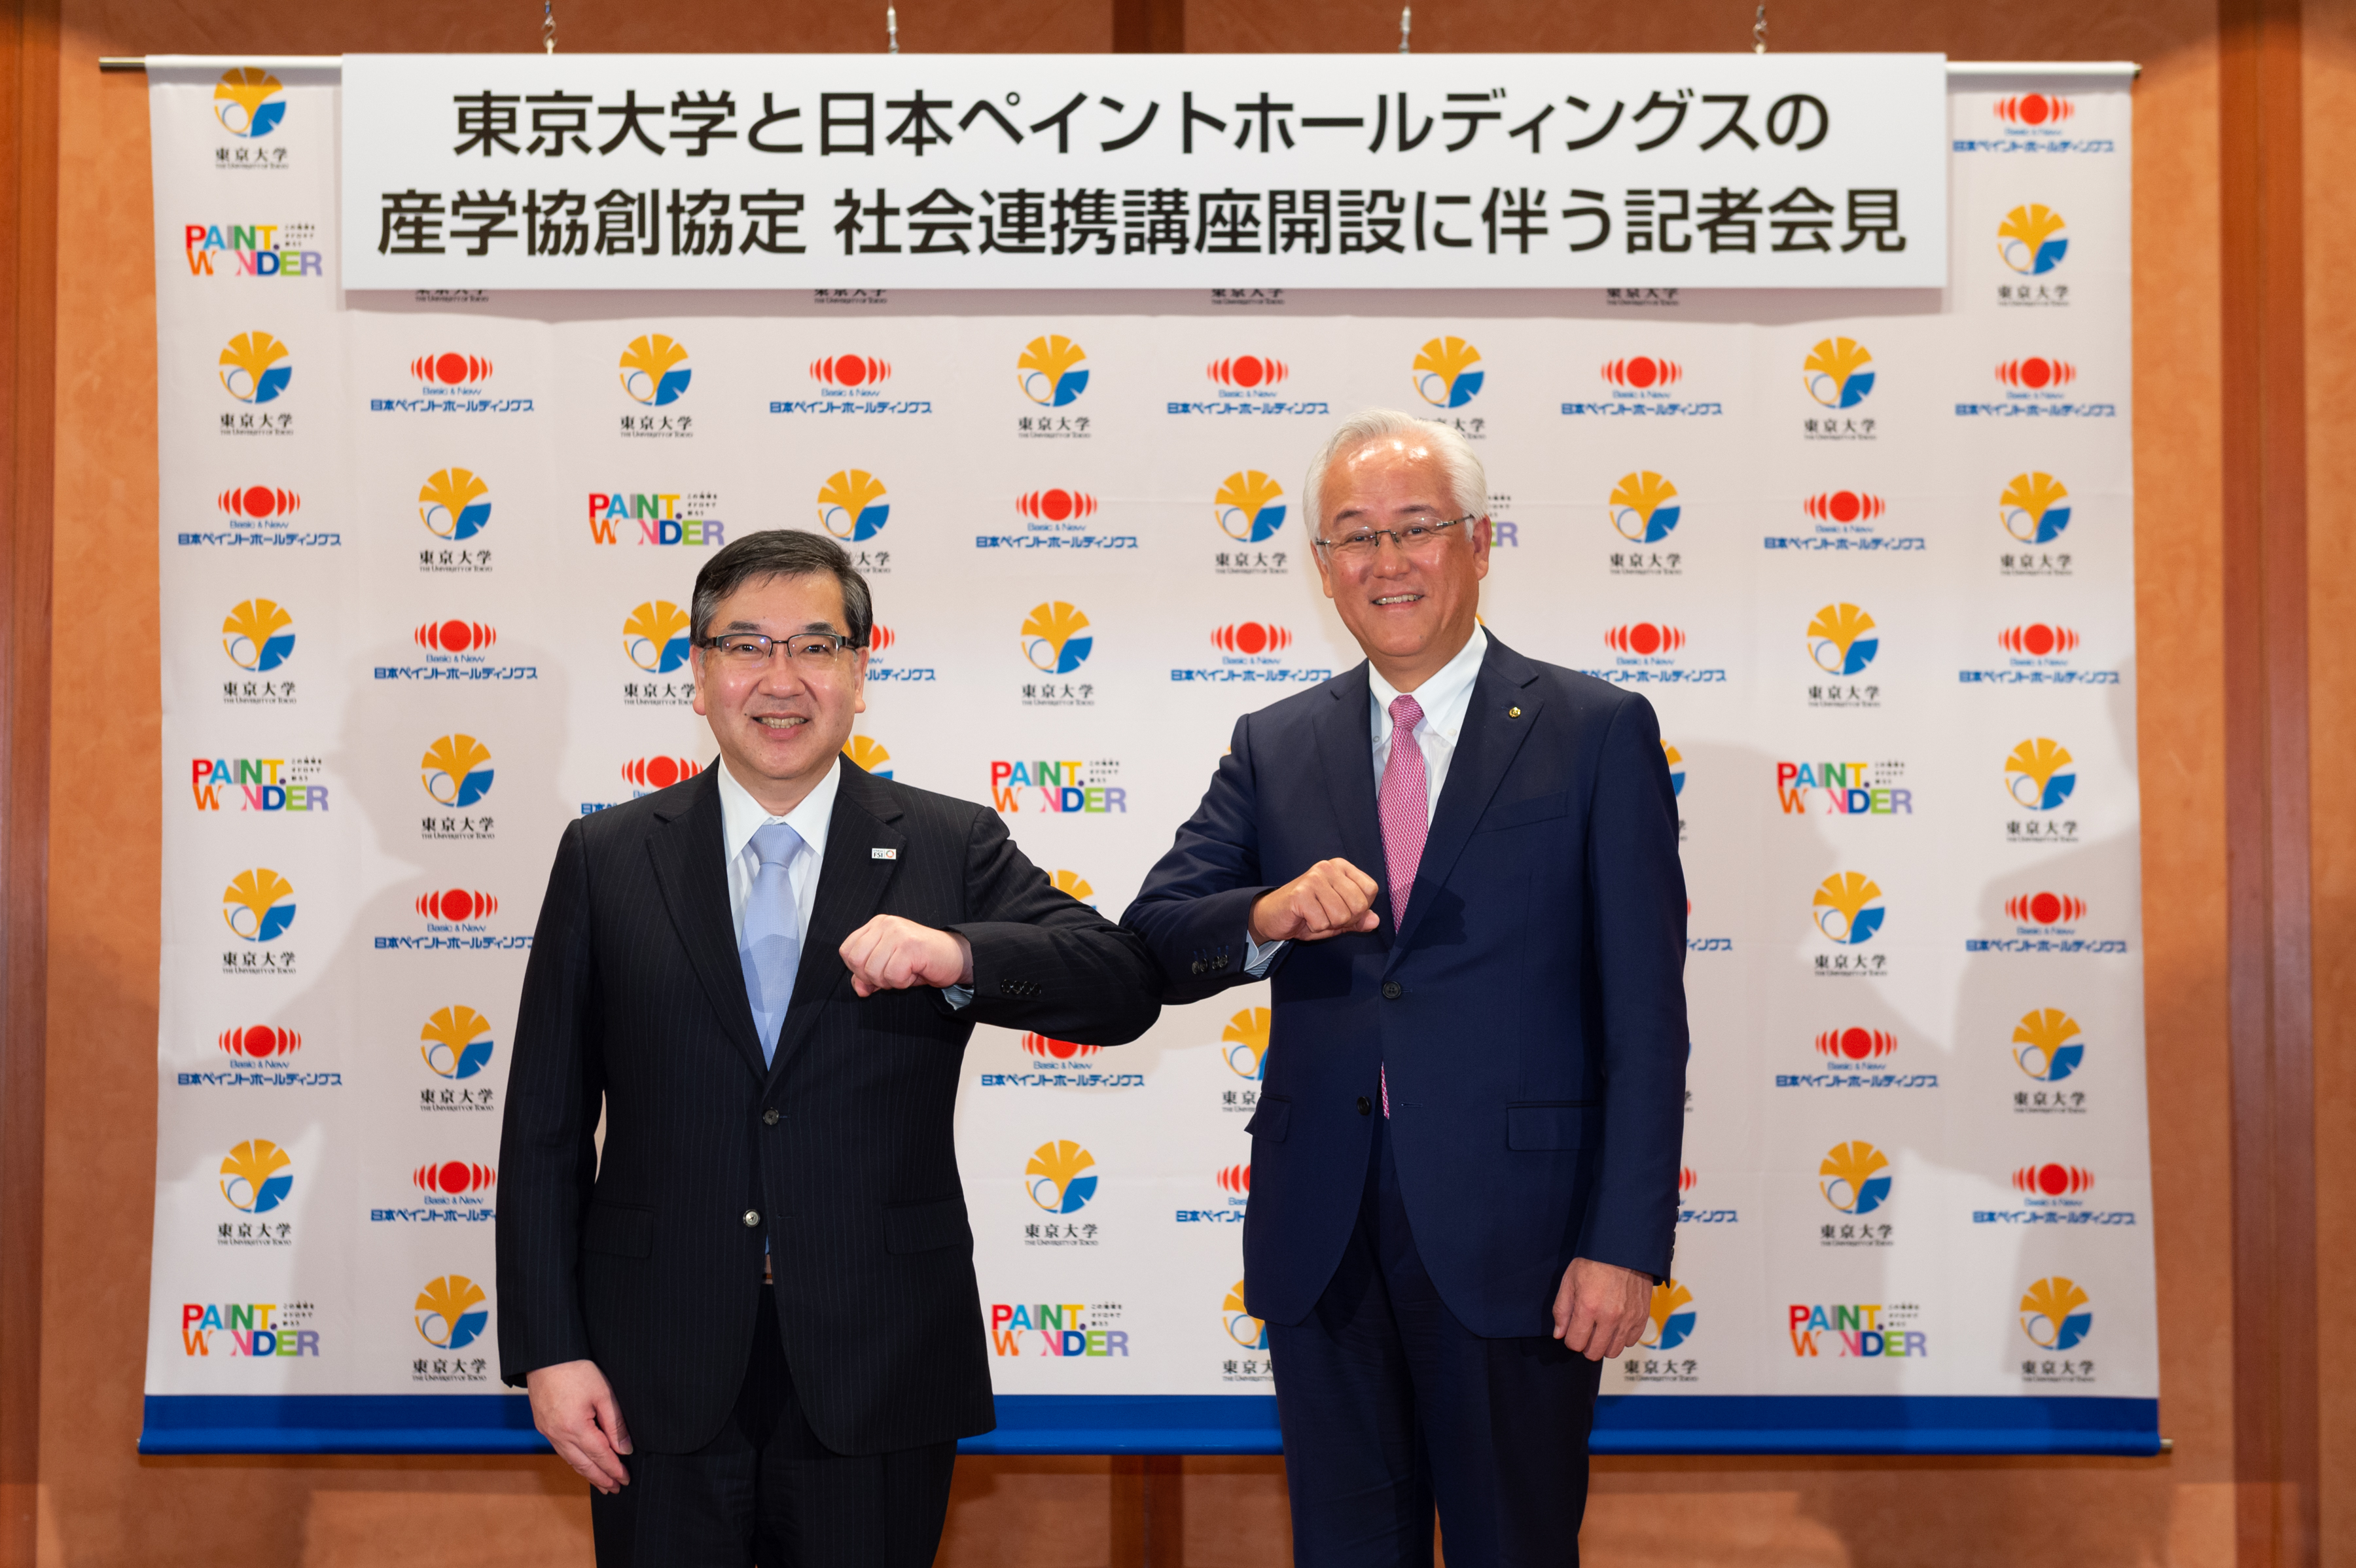 Conclusion of Agreement on Industry-Academia Co-creation Between The University of Tokyo and Nippon Paint Holdings